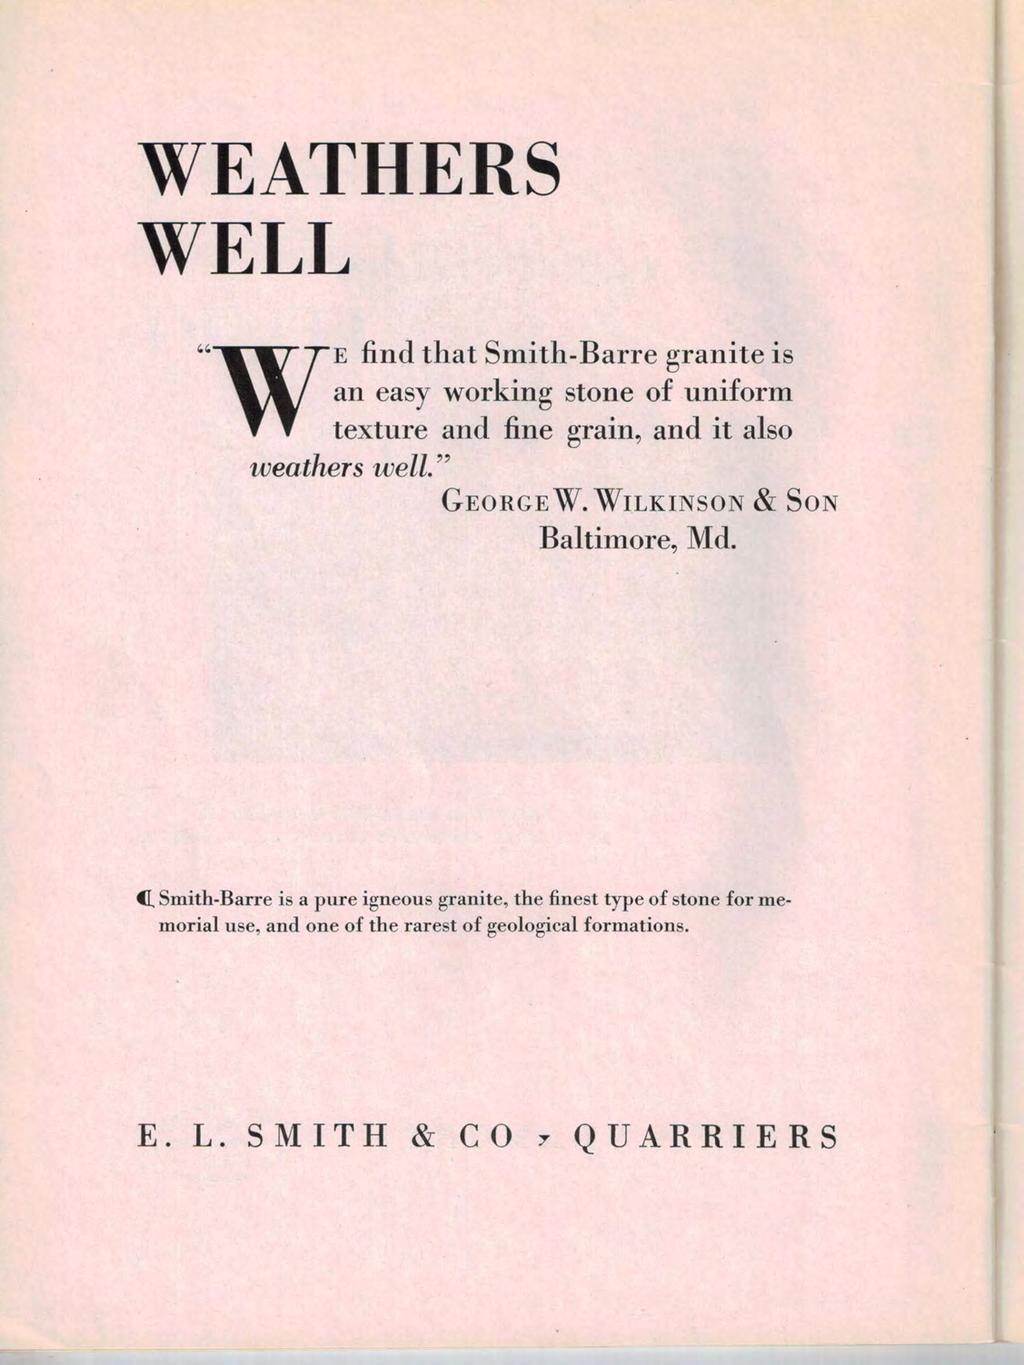 WEATHERS WELL "WE find that Smith-Barre granite is an easy working stone of uniform texture and fine grain, and it also weathers well." GEORGE W.